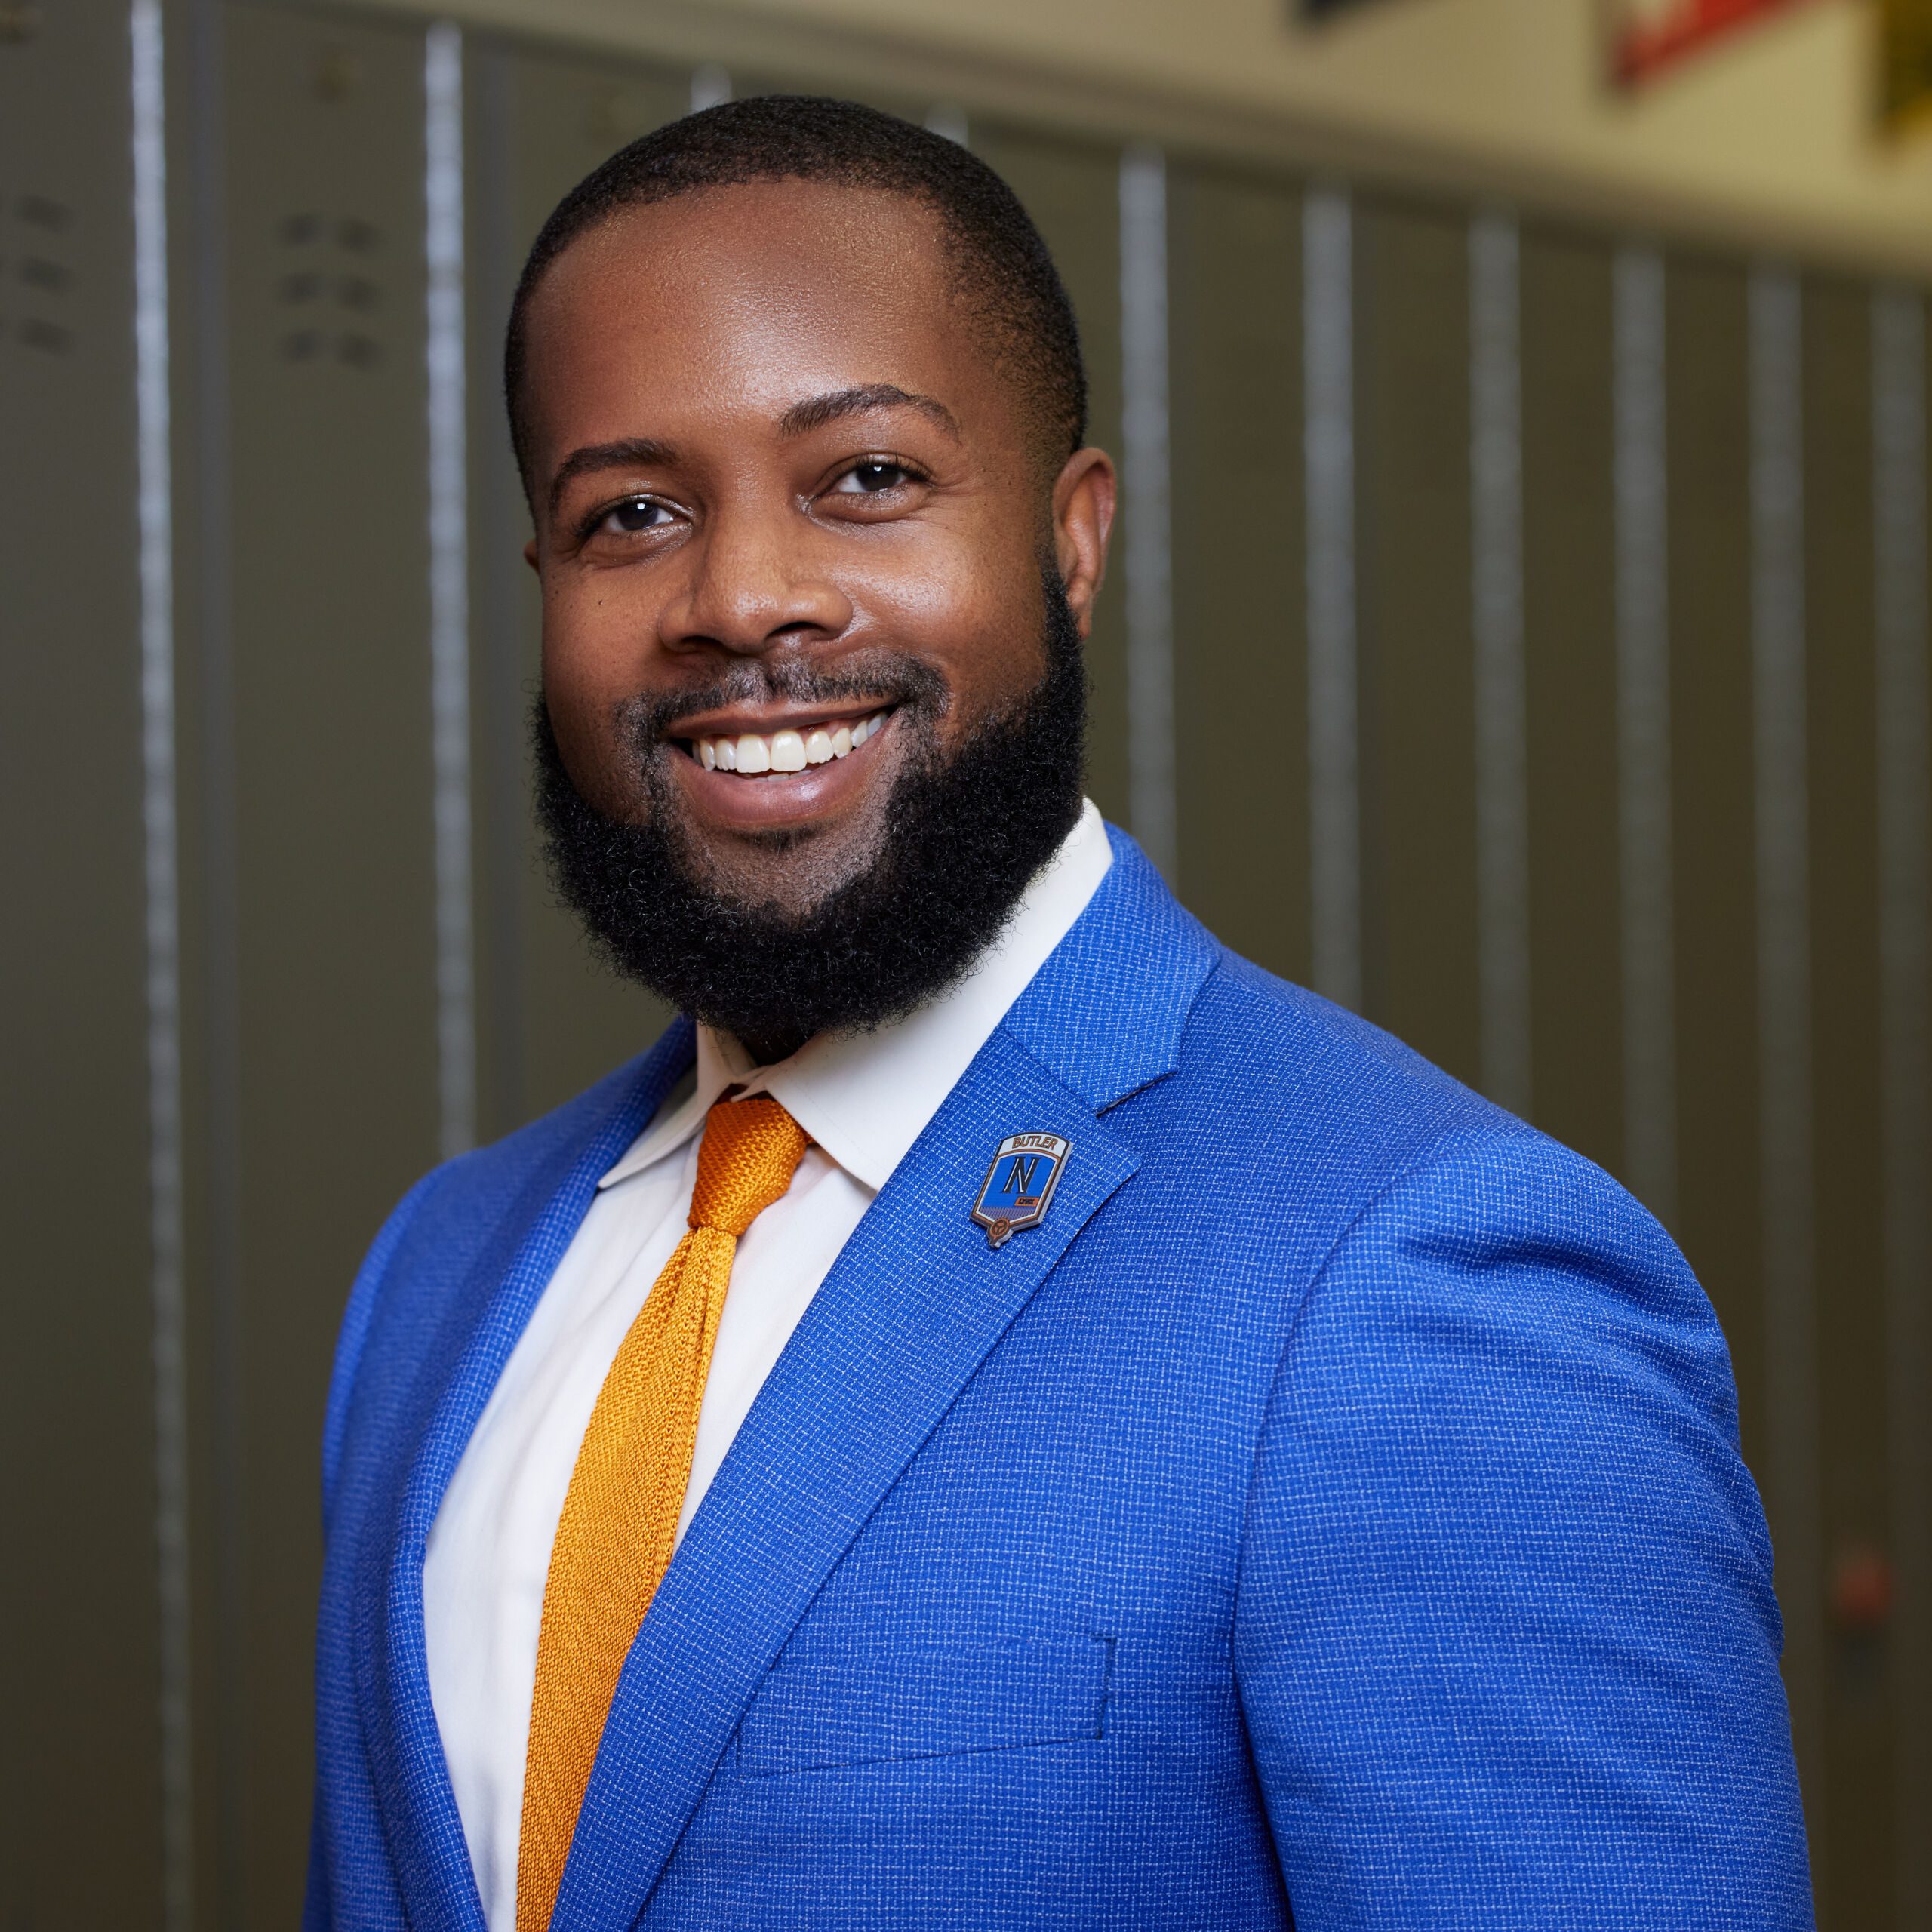 Photo shows a professional headshot of Brian Riddick, the principal of Butler College Prep. He is a Black man with short black hair and a short beard. He is wearing a bright blue suit with a white button up and a bright orange tie, the colors of Butler College Prep. He is smiling and looking at the camera. You can see lockers at Butler behind him.